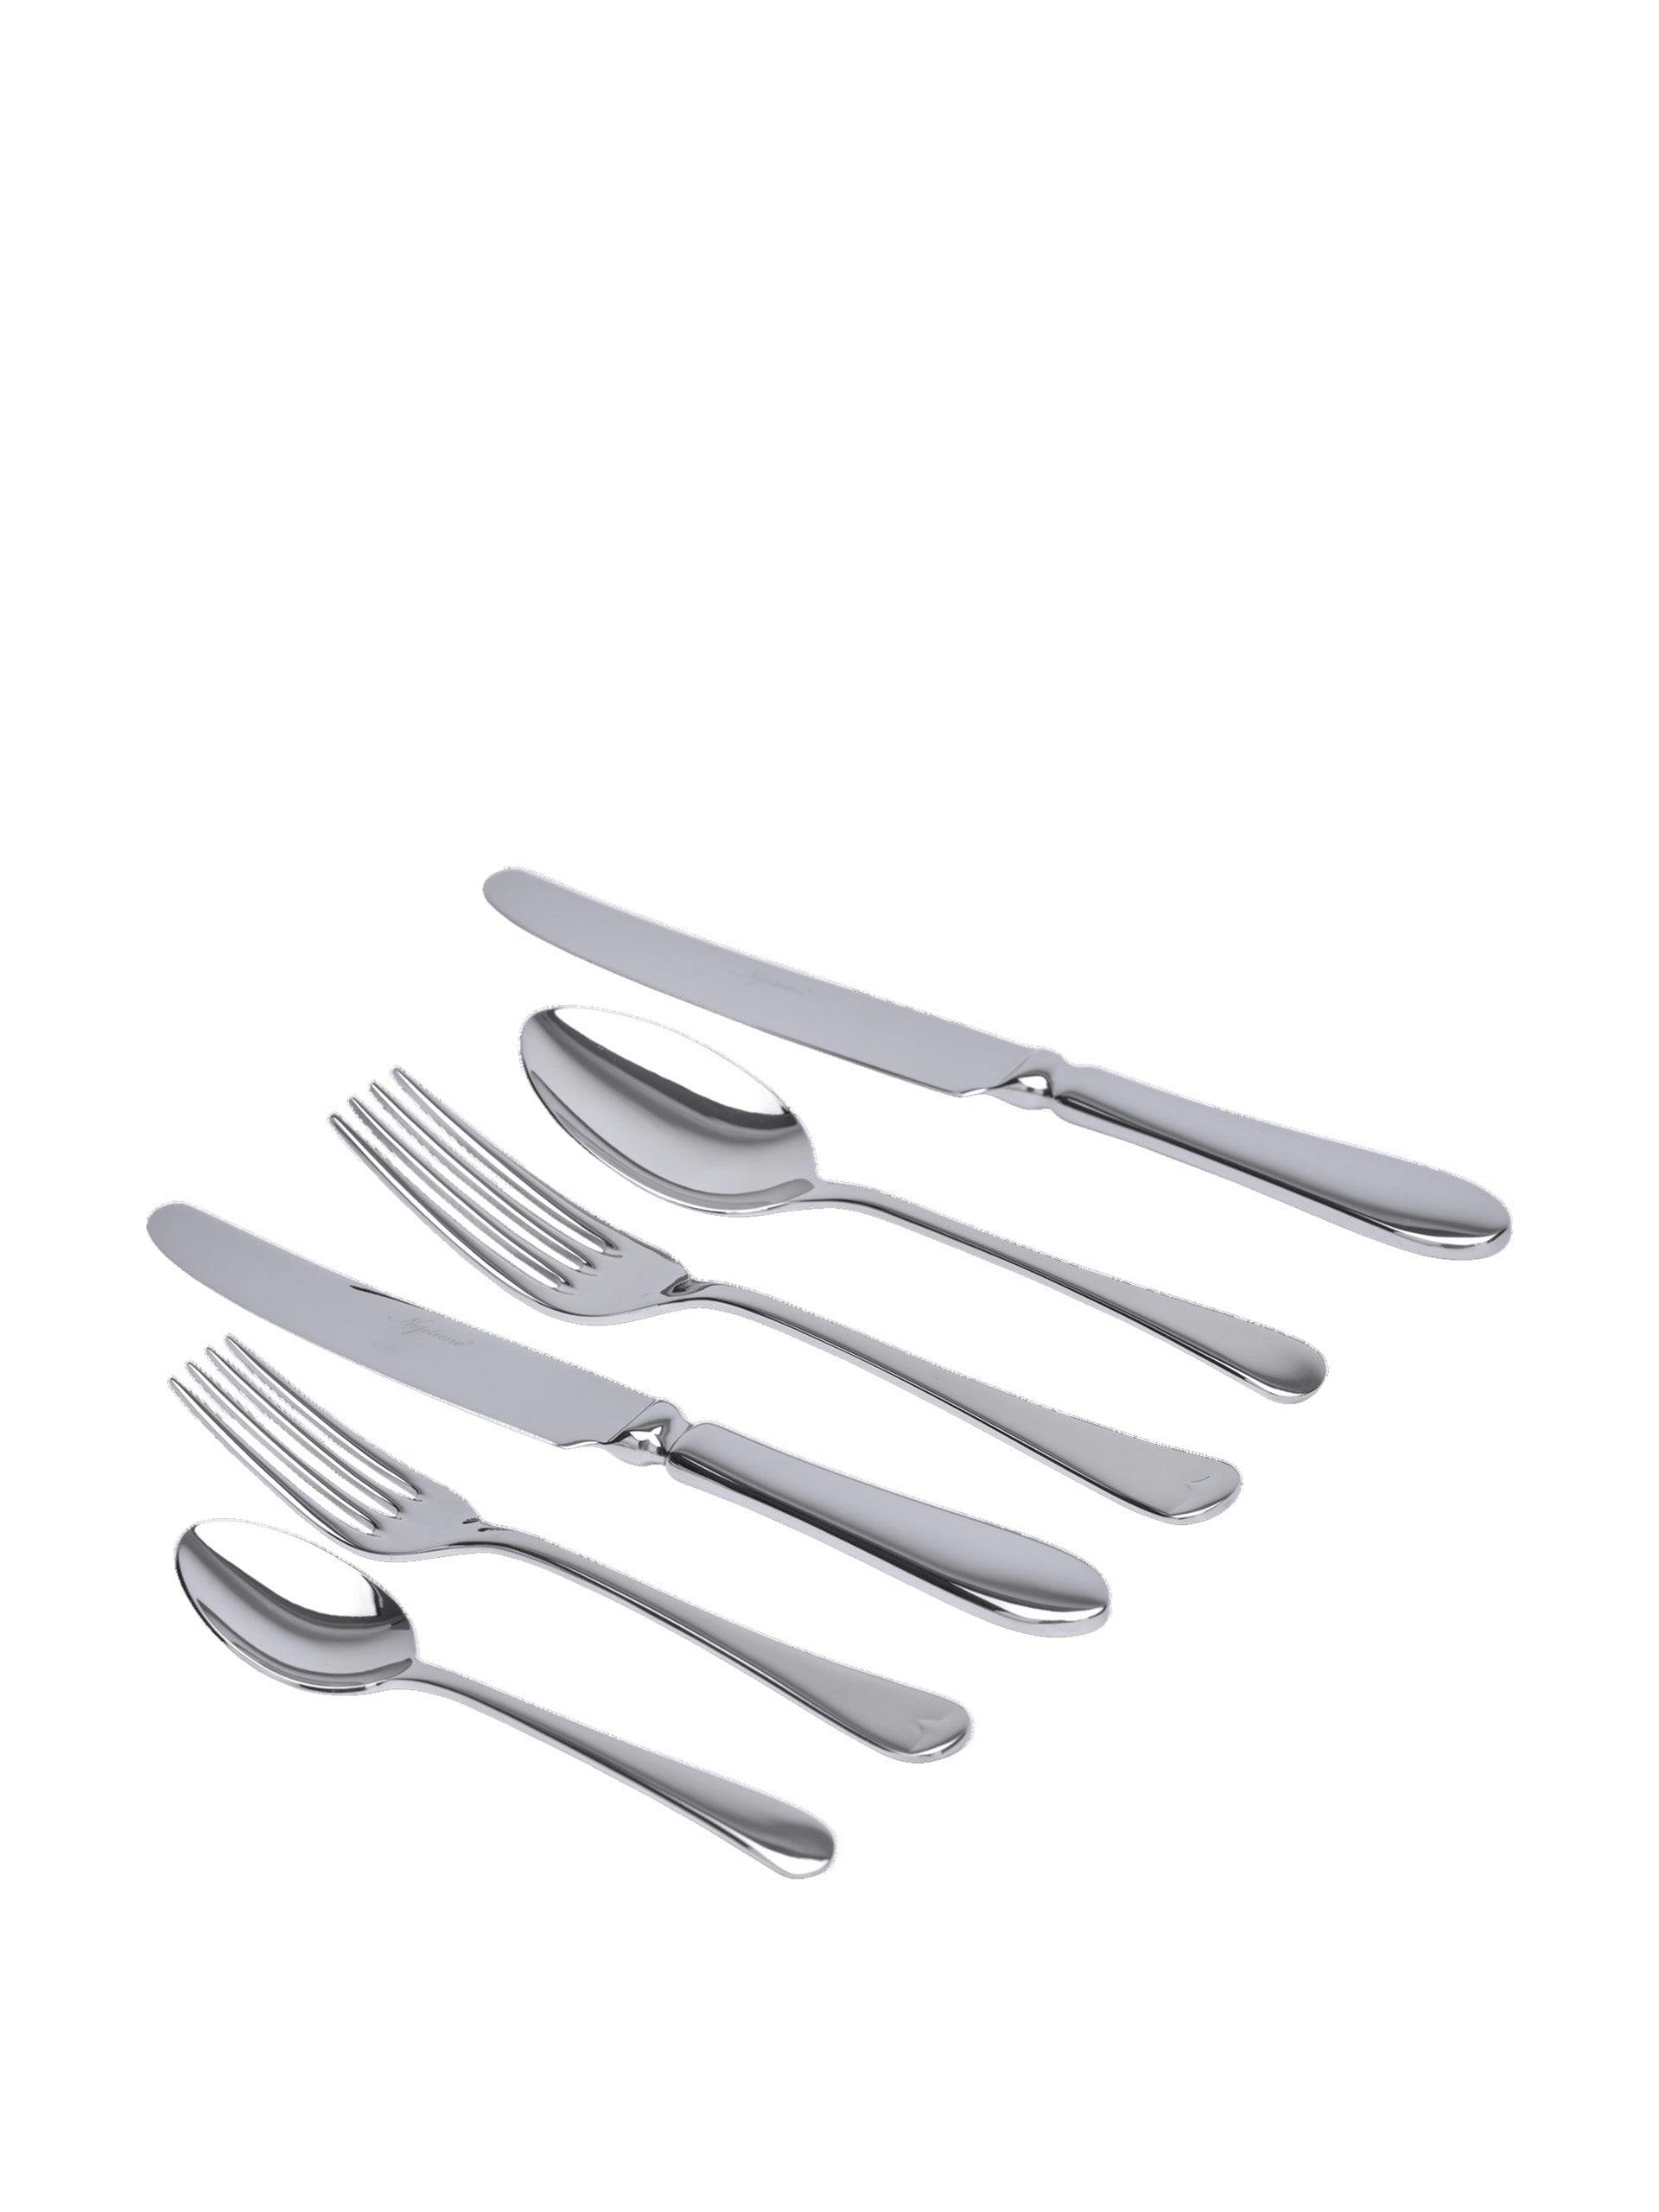 Thaxted cutlery (36-piece set)